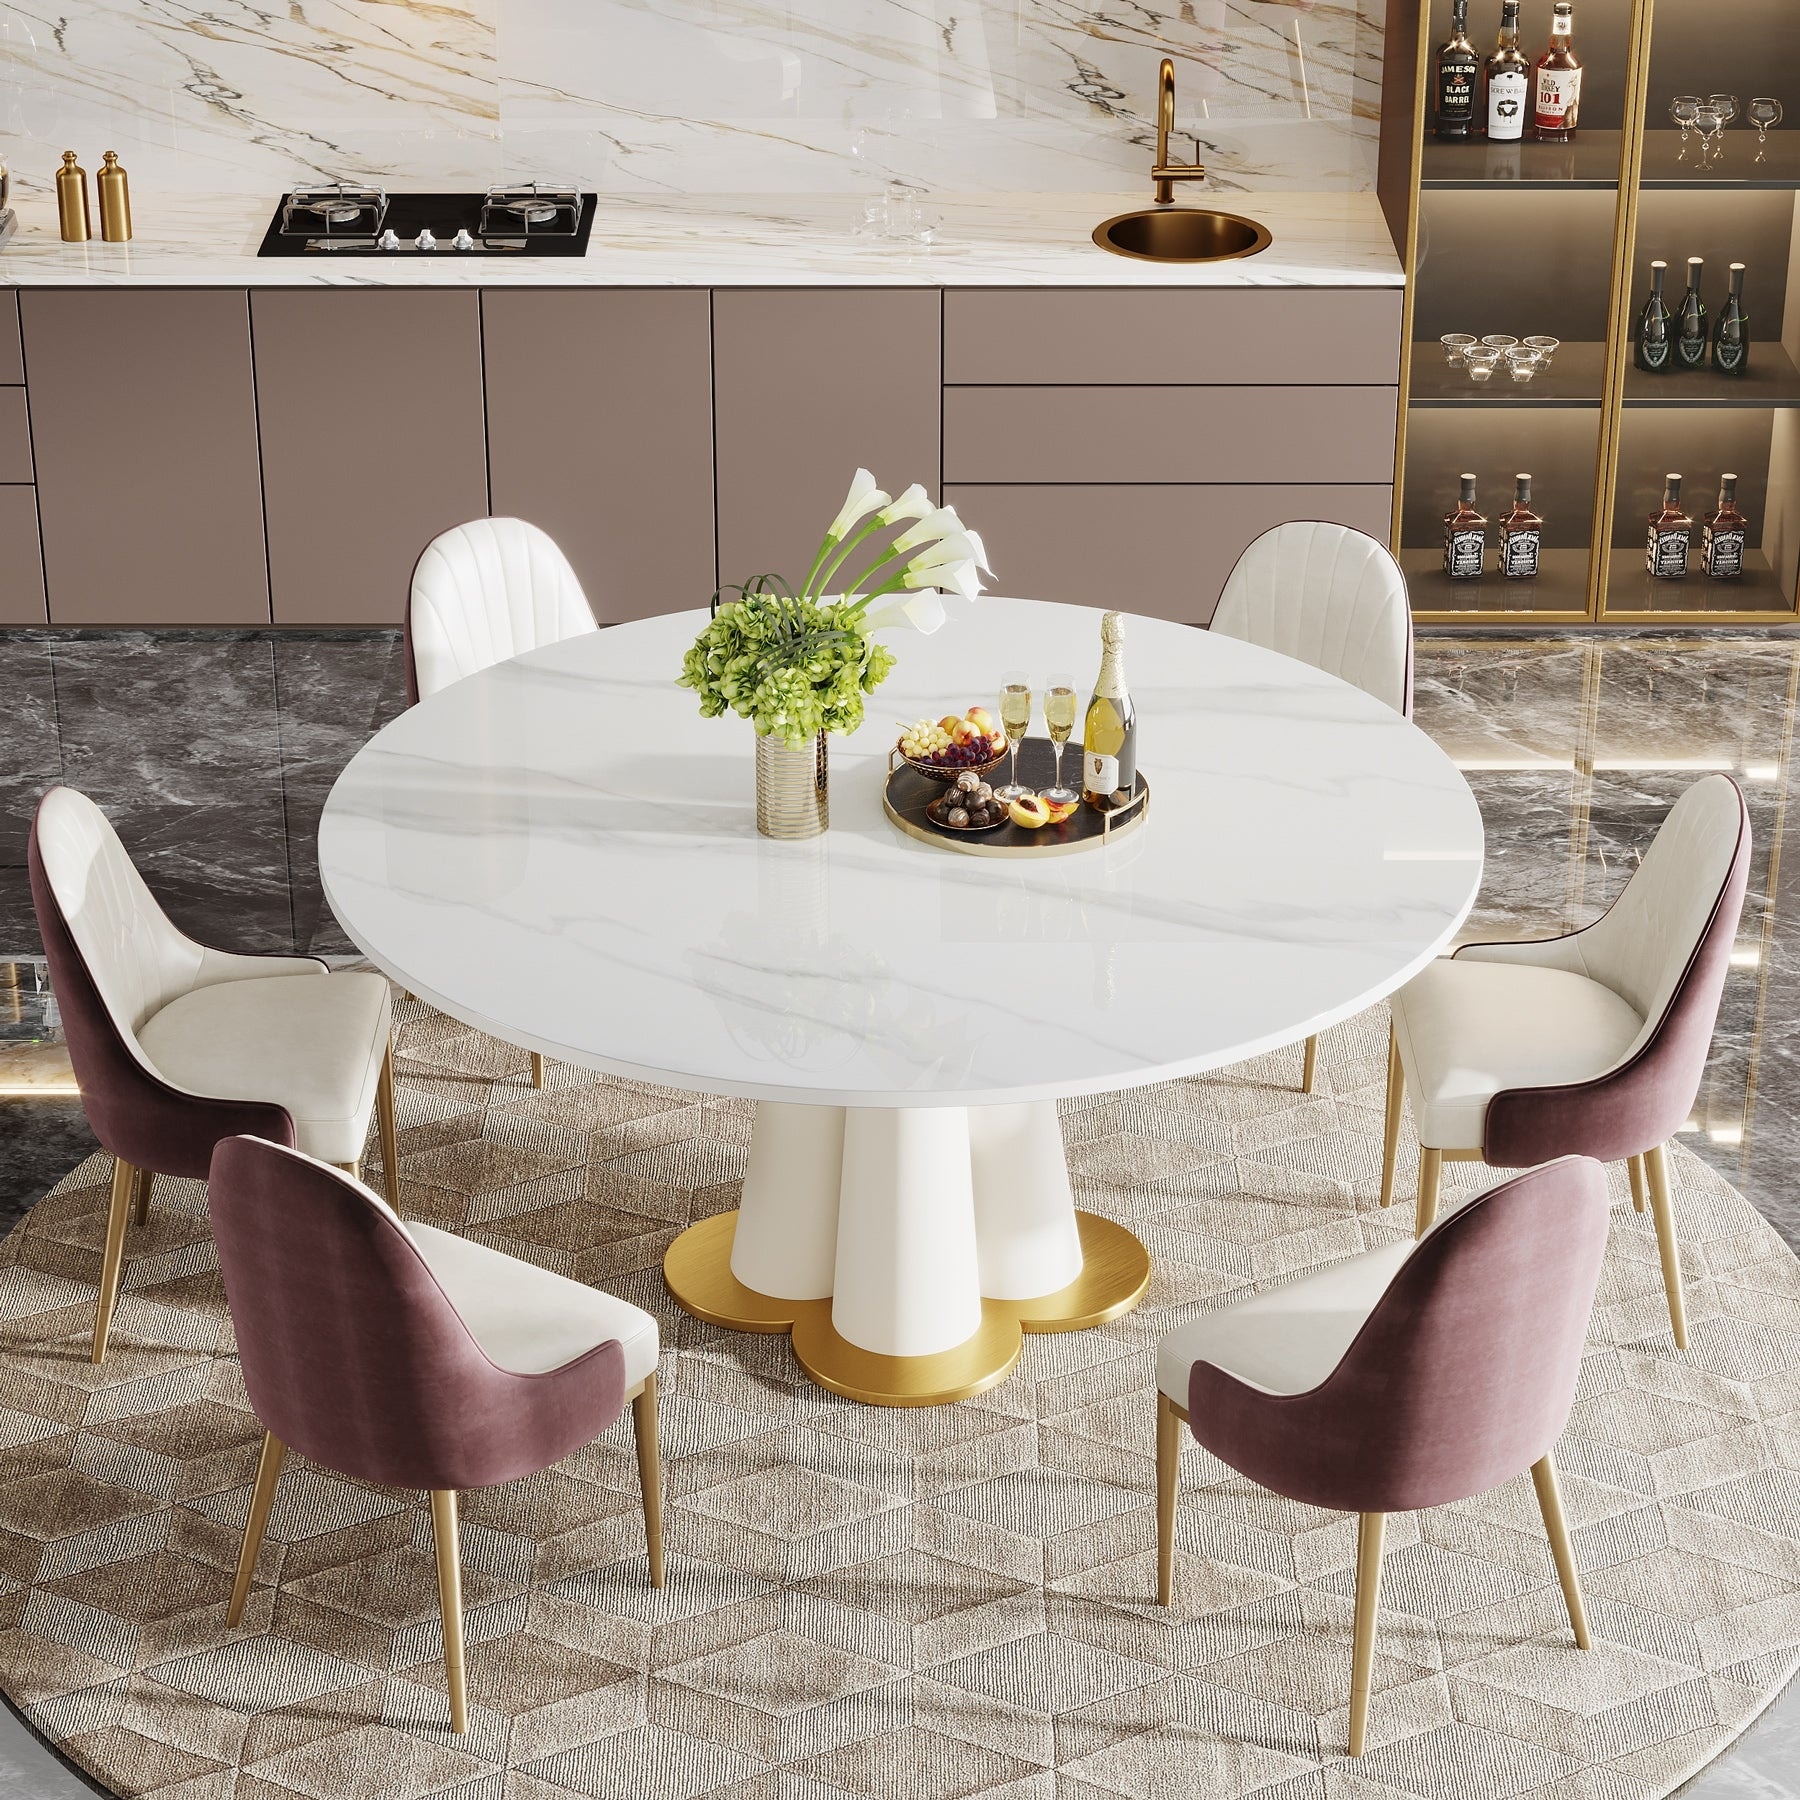 59-Round-Dining-Table-for-6,-Modern-Kitchen-Table -with-Sintered-Stone-Top-&-Four-Leaf-Clover-Stainless-Steel-Base.jpg